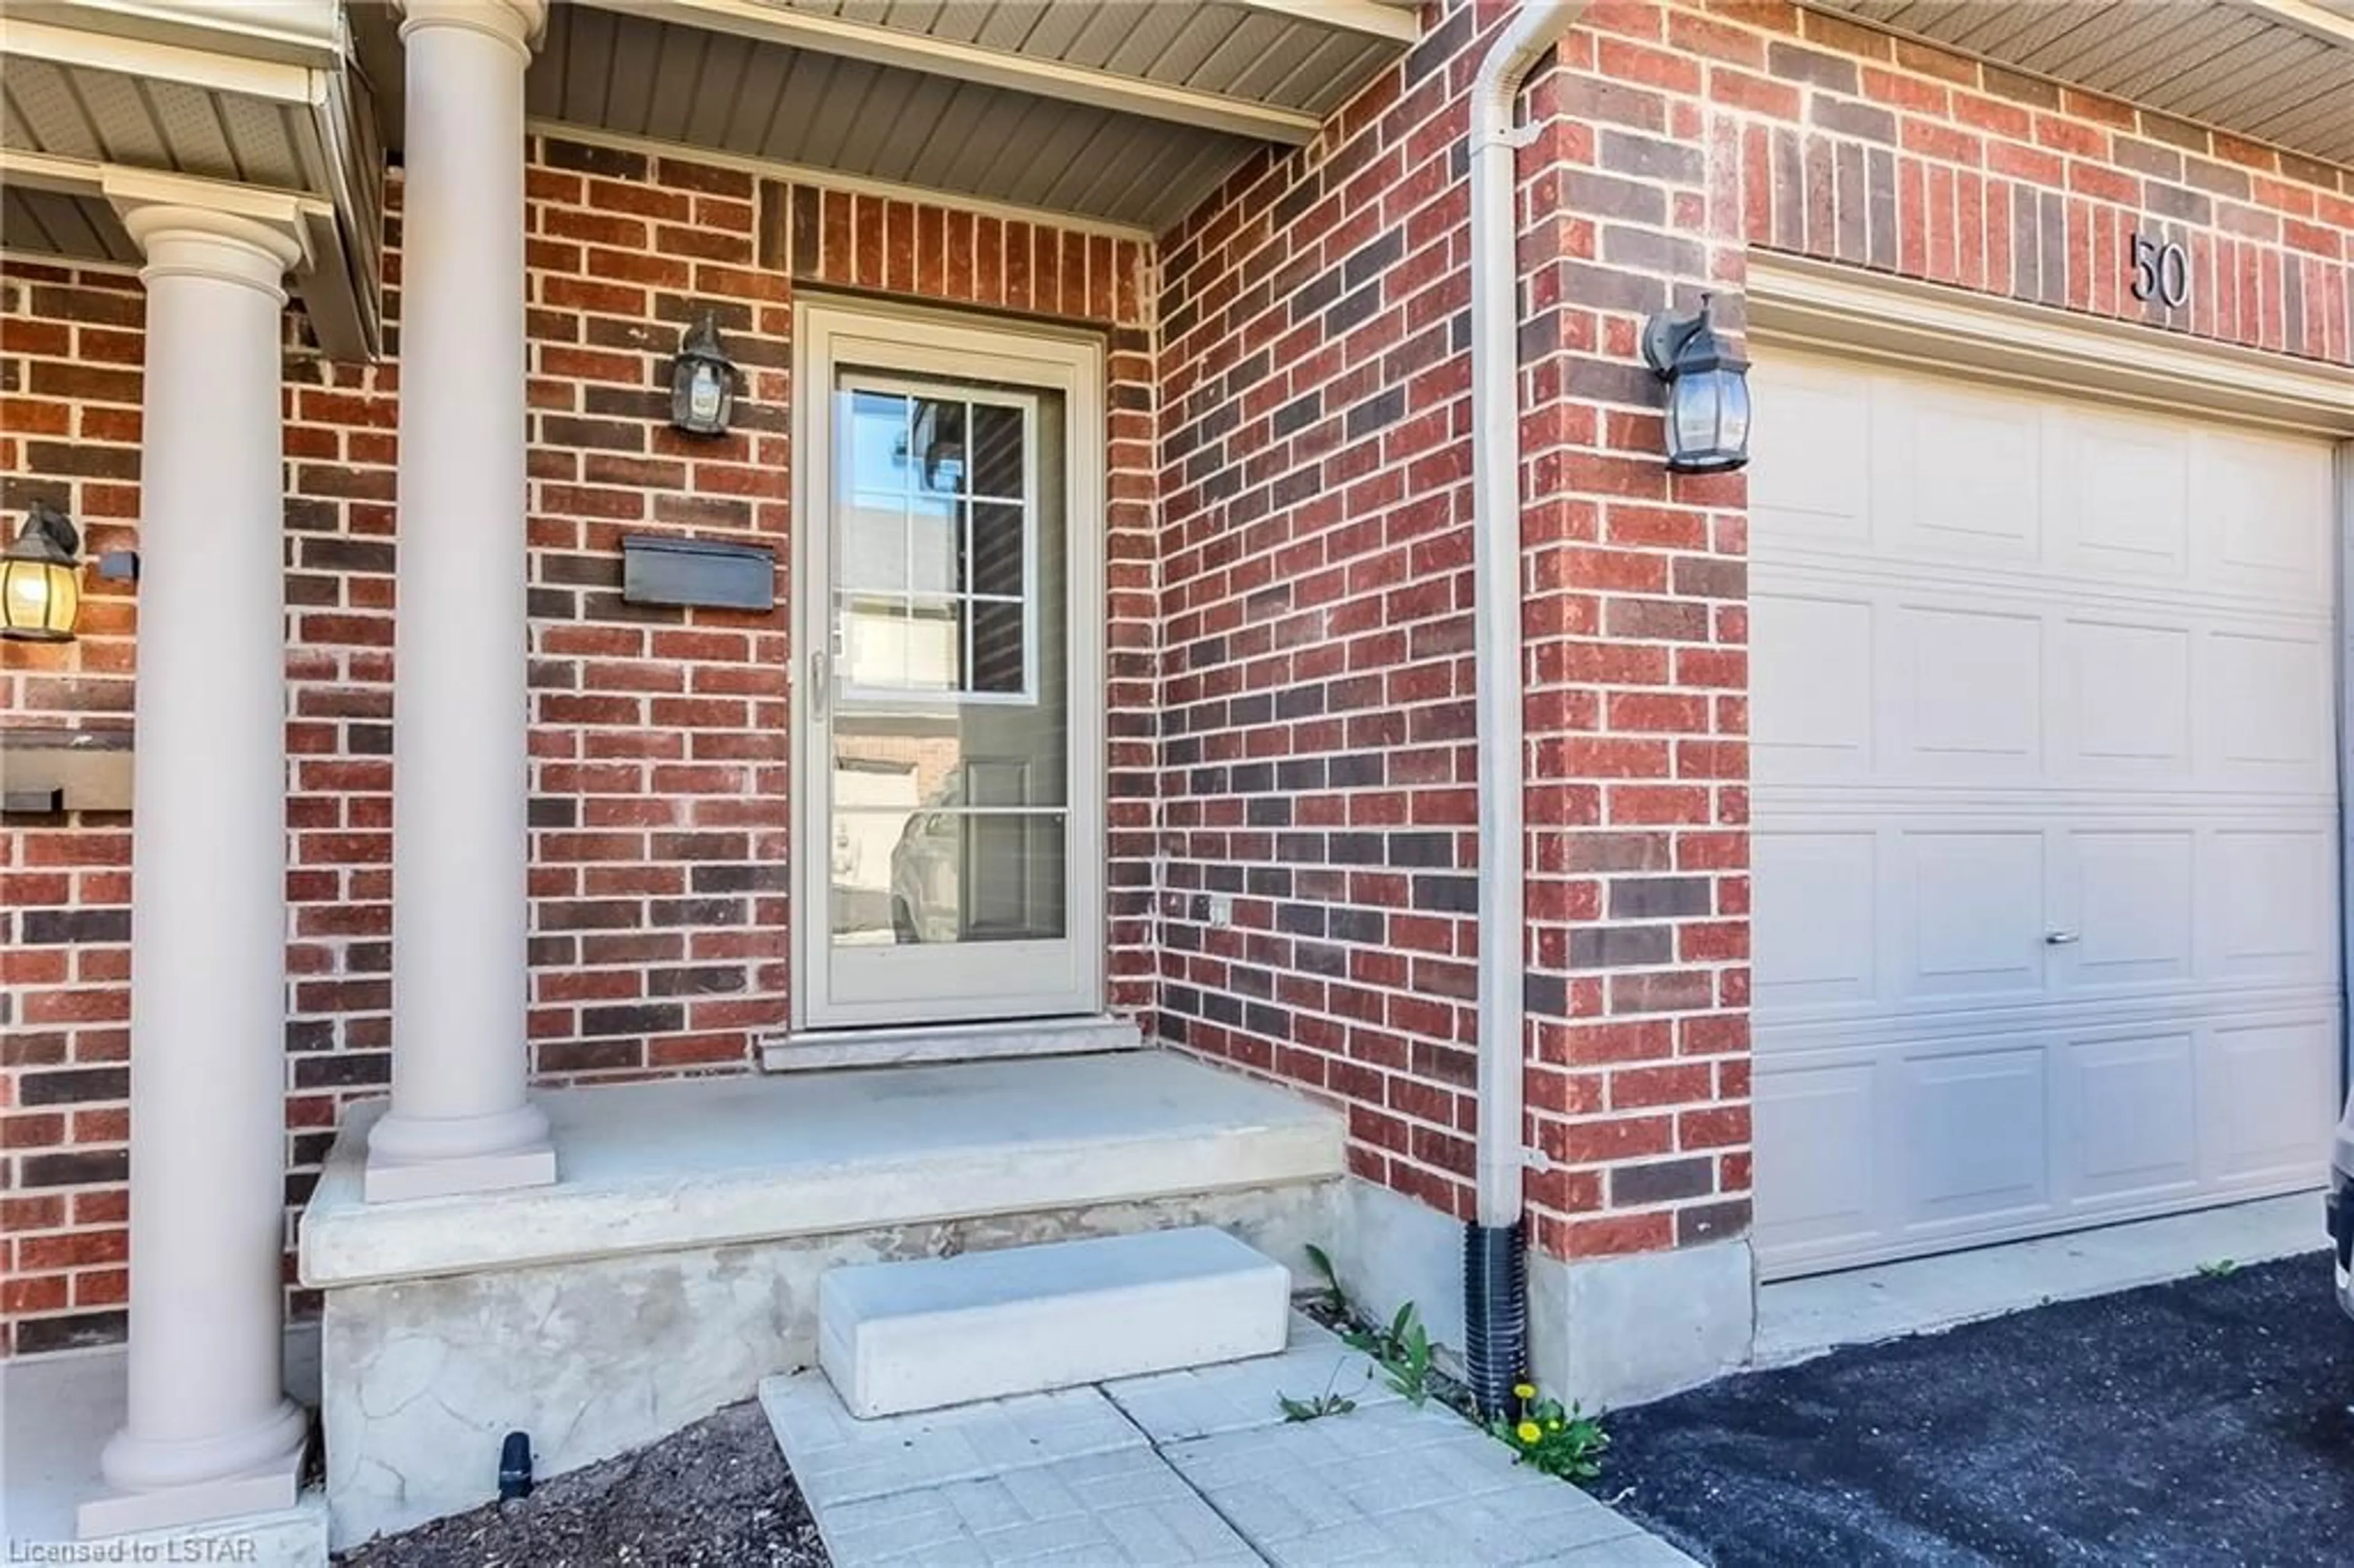 Home with brick exterior material for 1059 Whetherfield St #50, London Ontario N6H 0B6